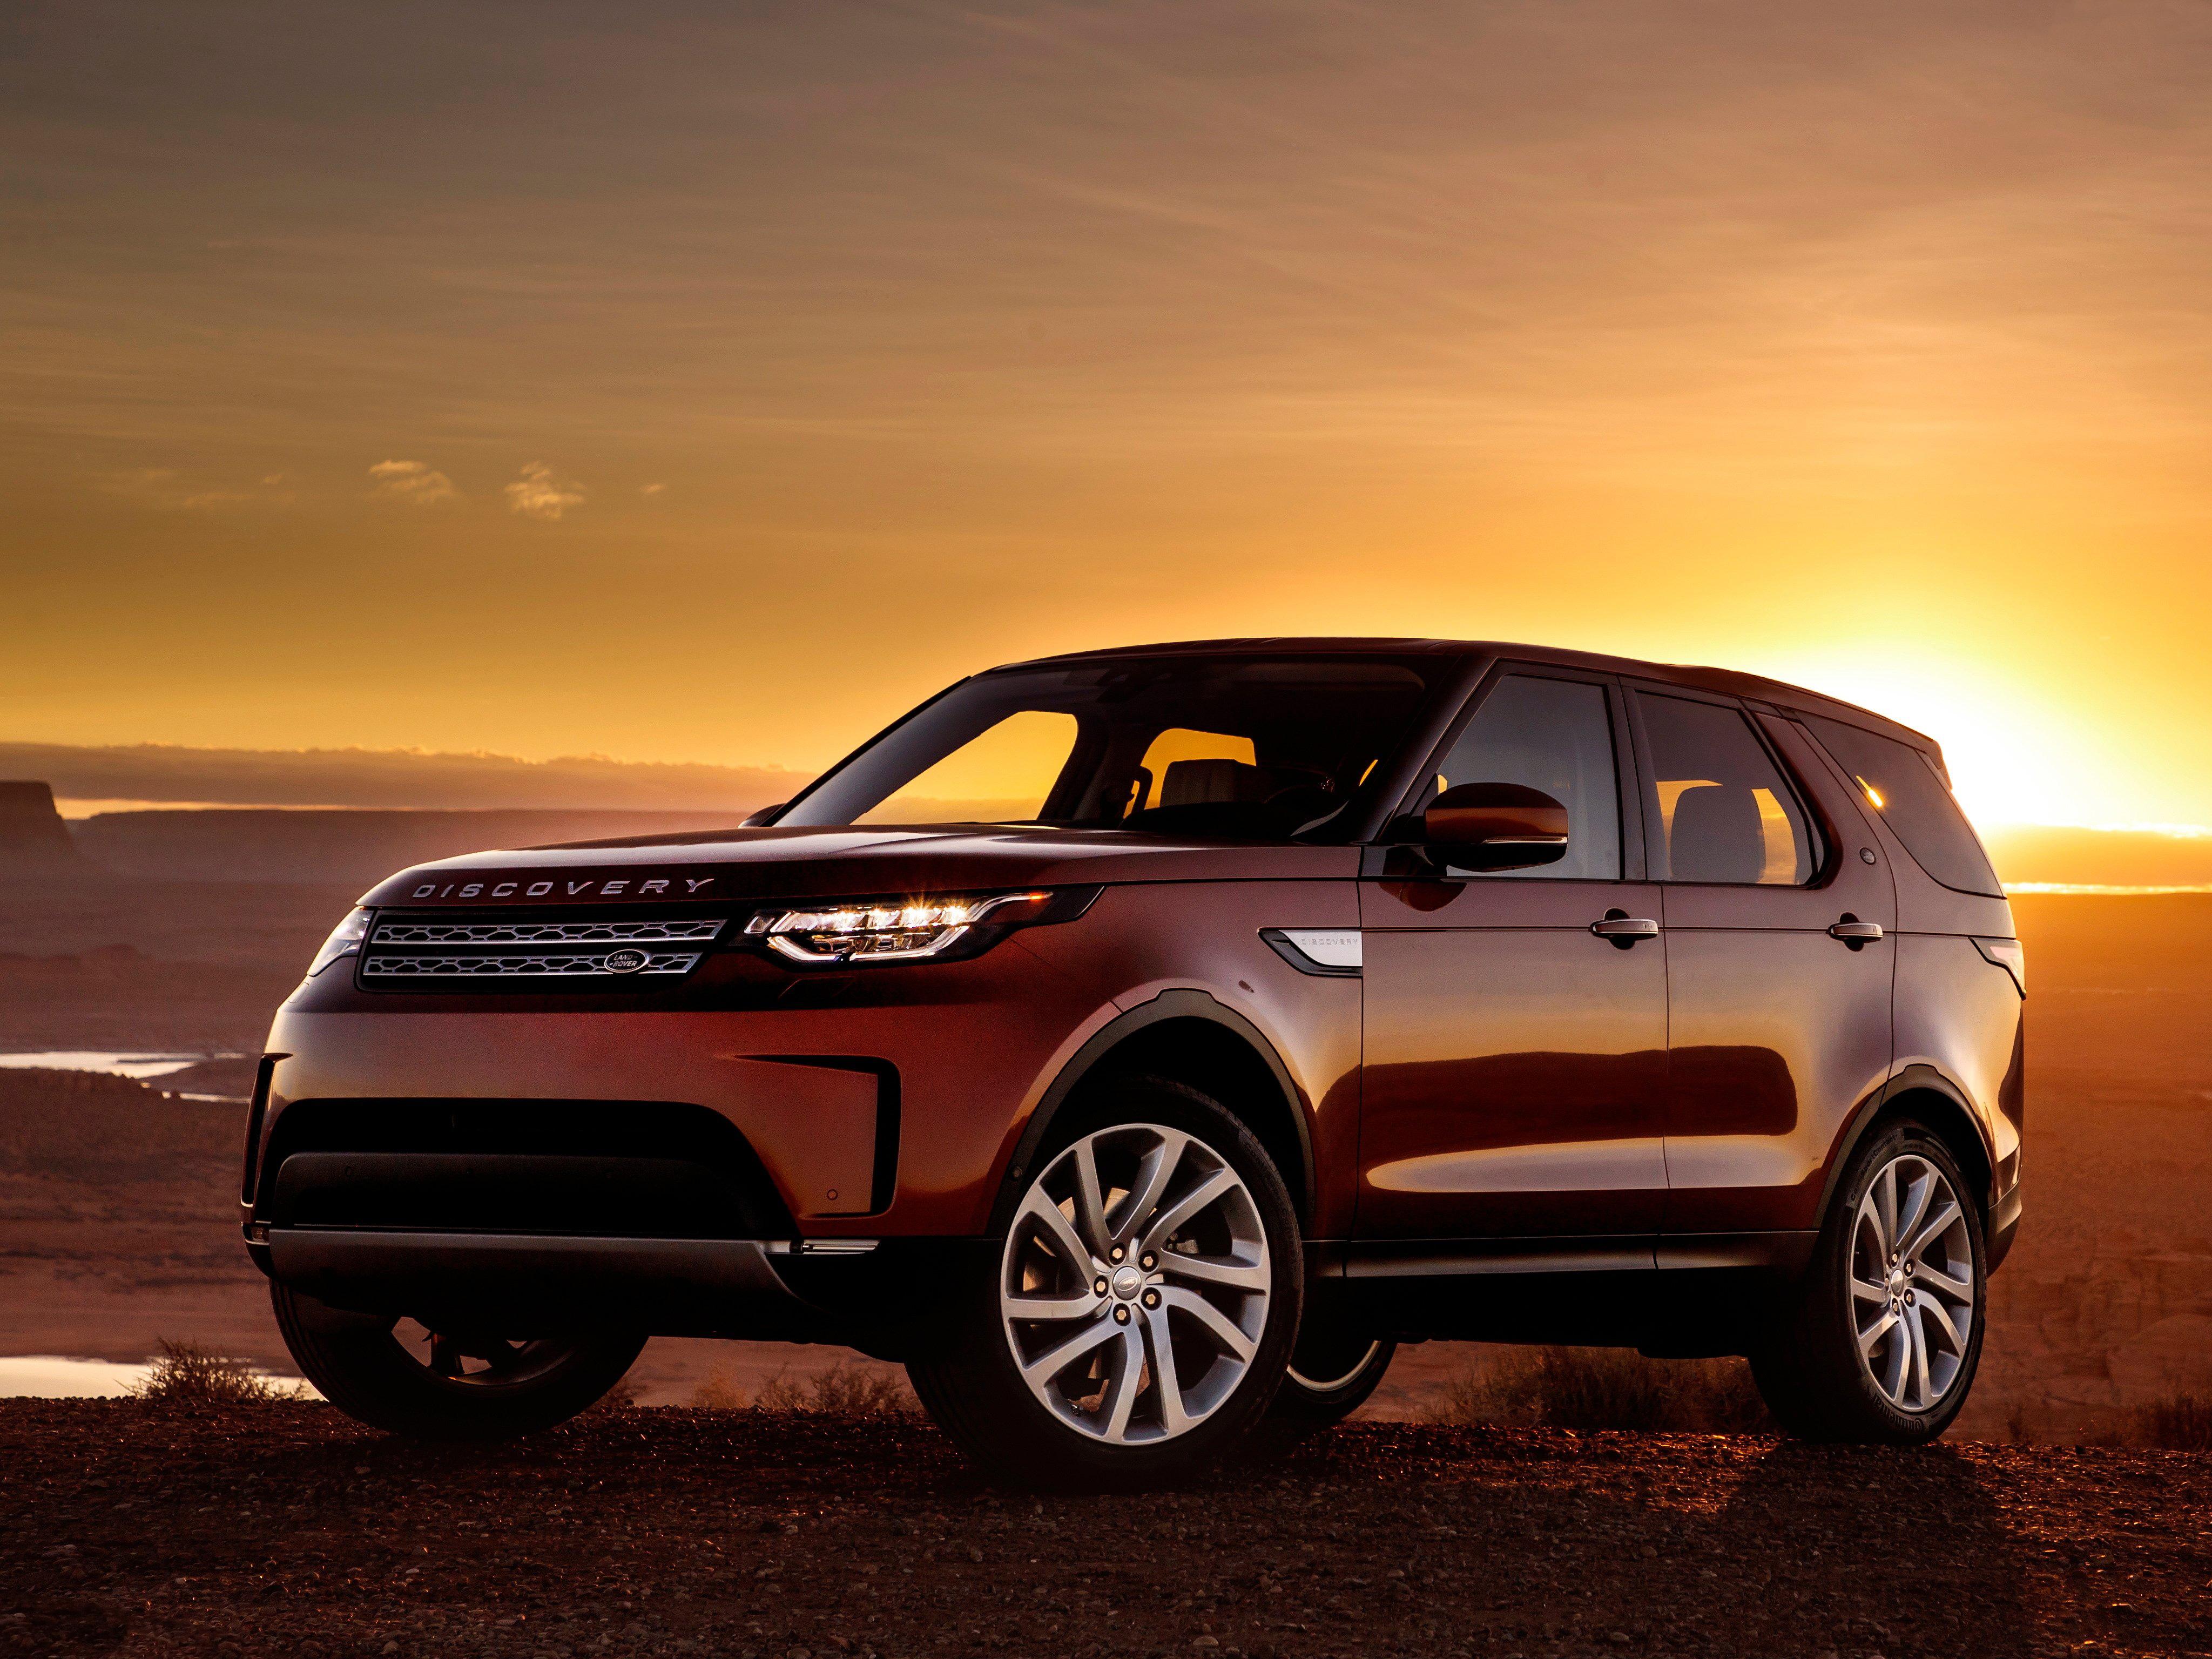 Land Rover Discovery Wallpaper 10 X 3072